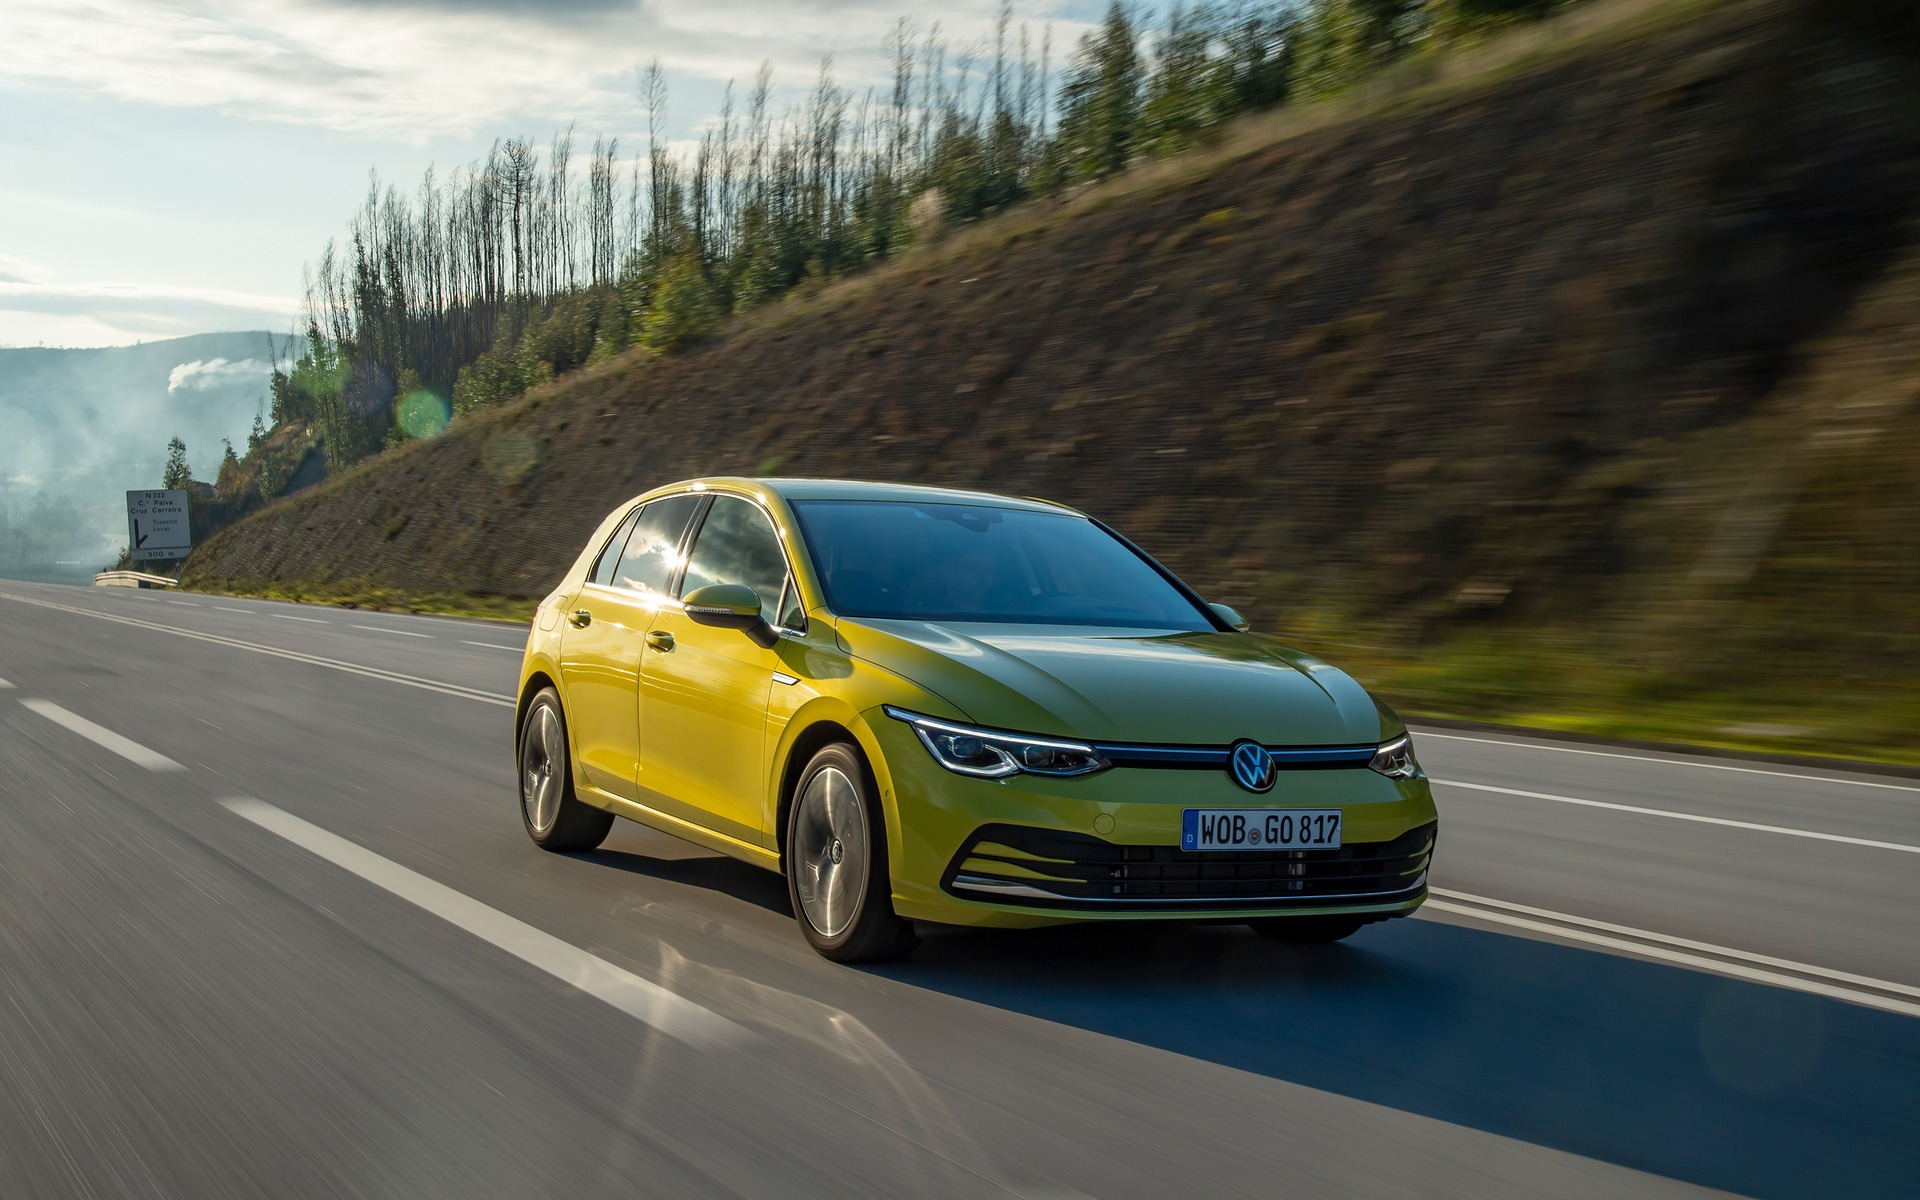 Golf 8 Variant Coming to Europe in Late 2020 With New Styling